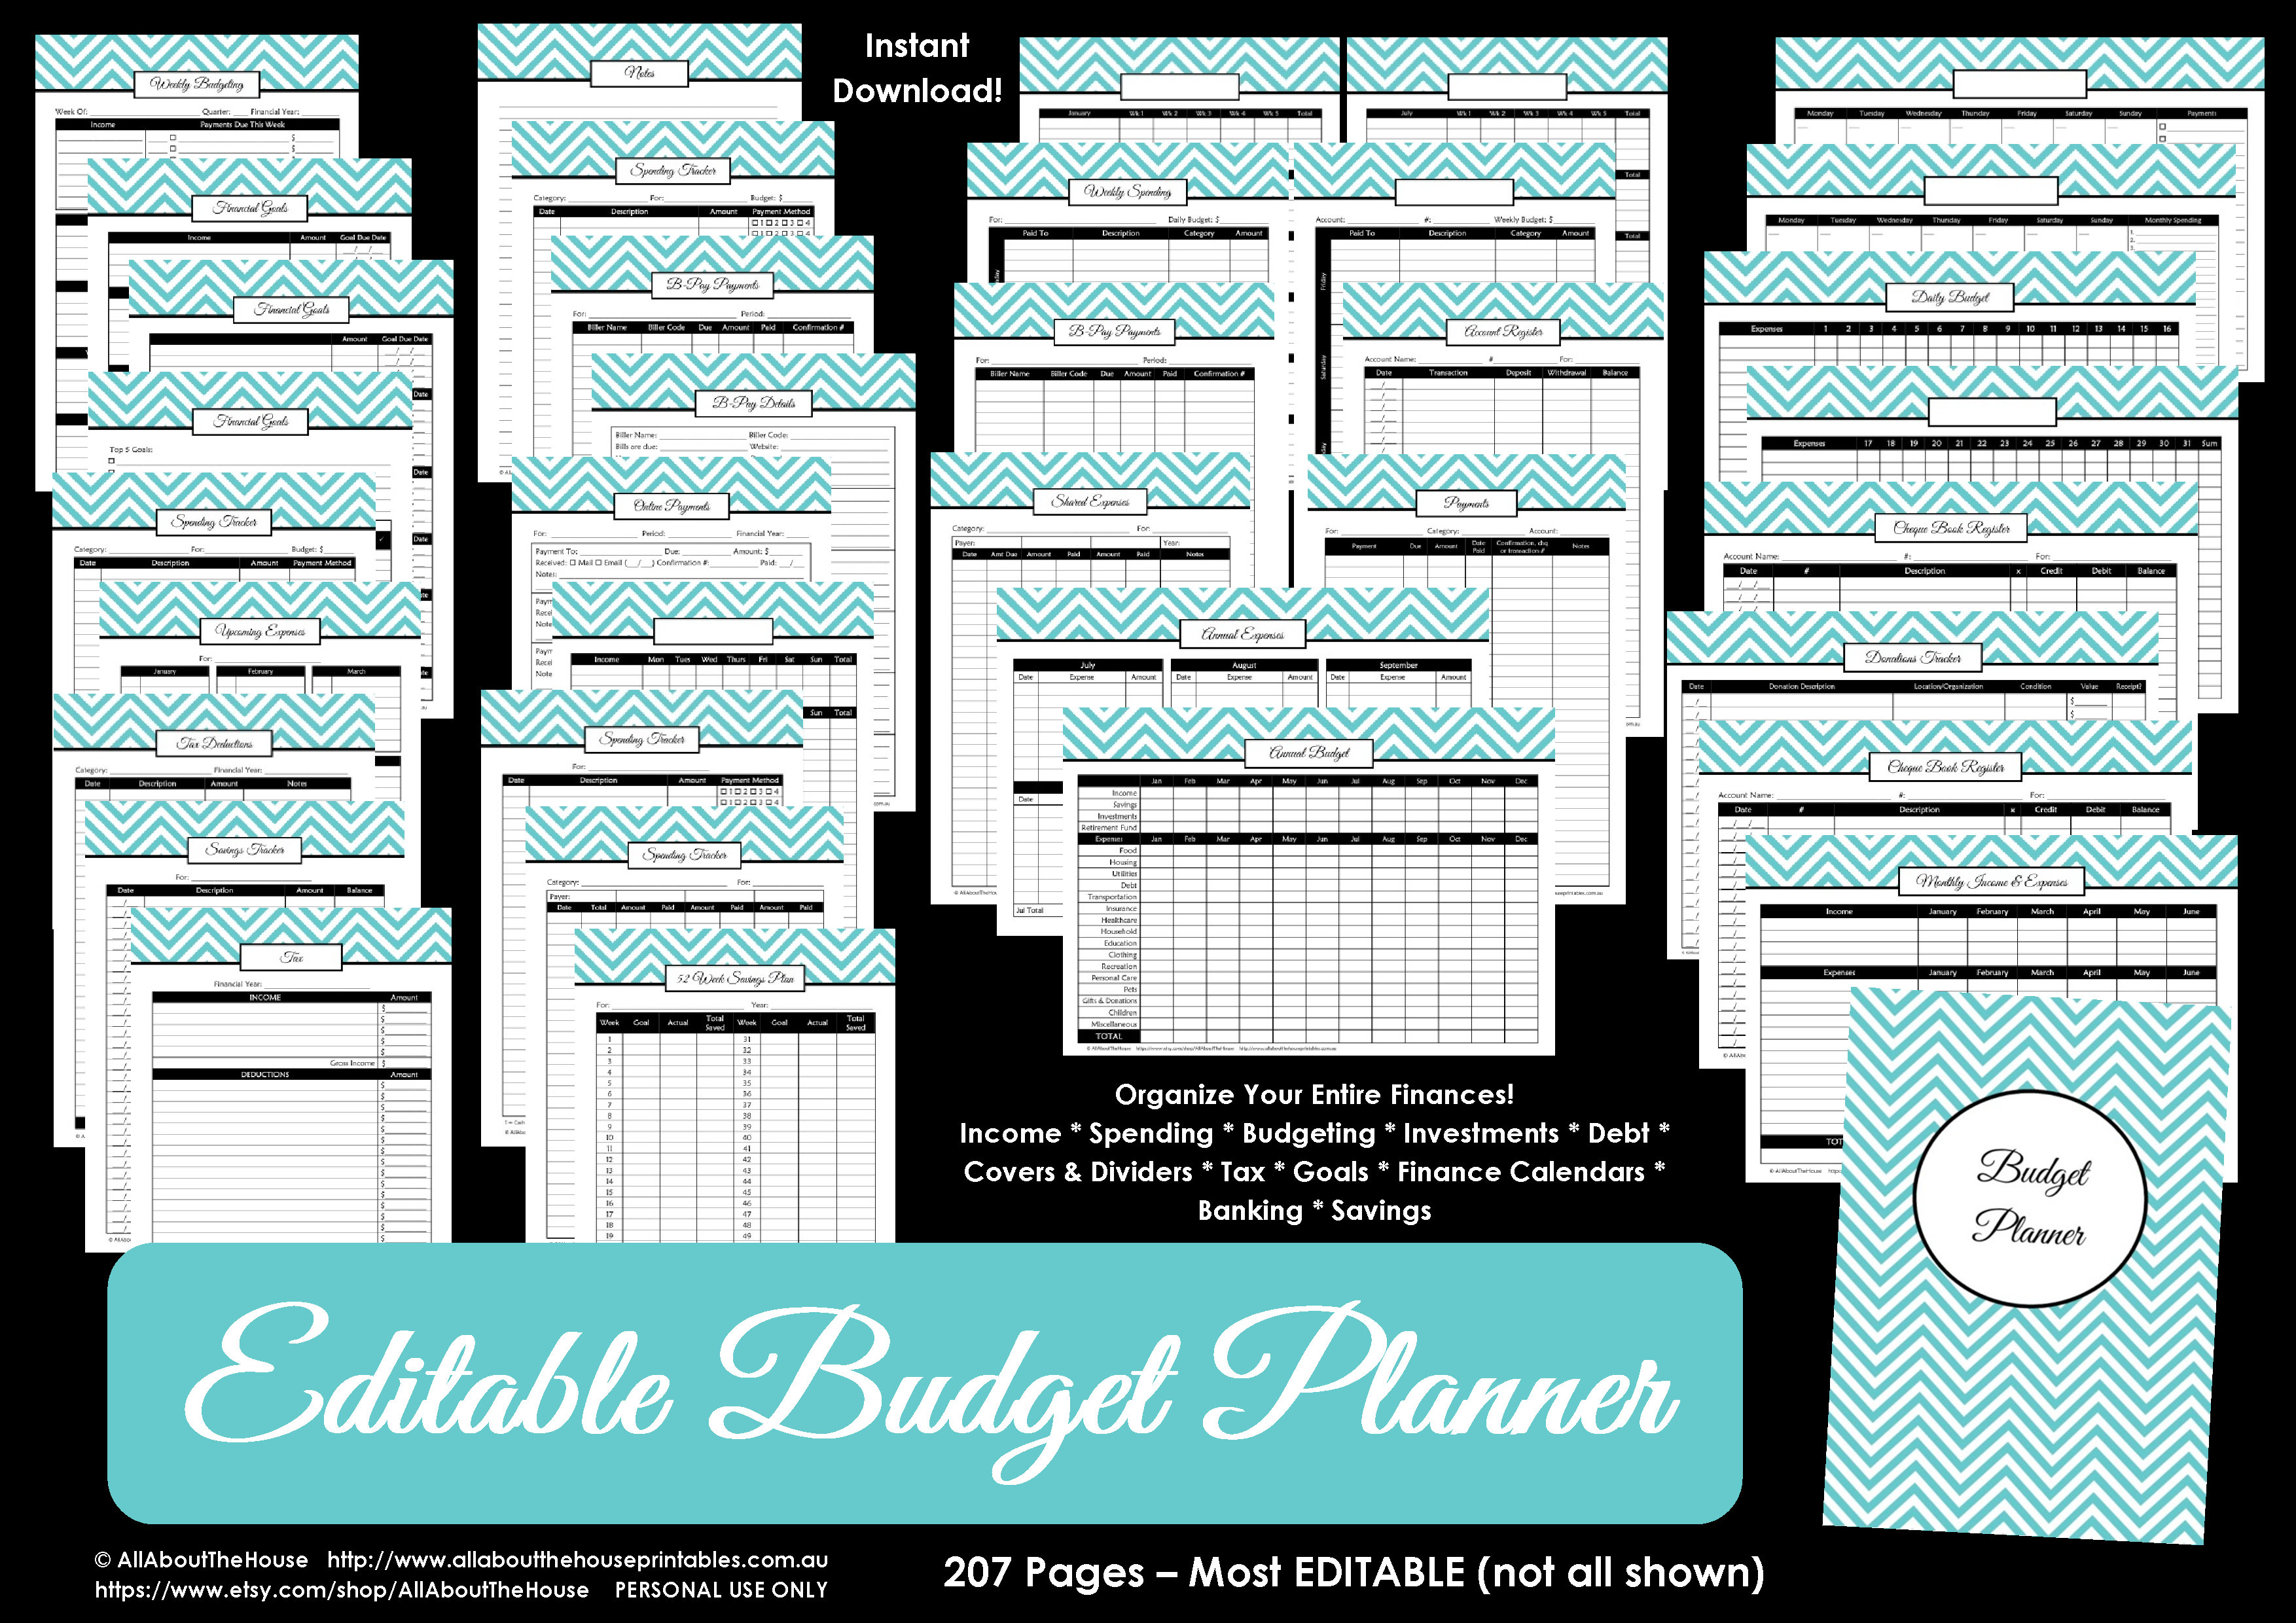 Filofax Debt Plan Instant Download Monthly Budget Planner Financial Sheets Household Planning A5 Budget Printables Financial Organiser